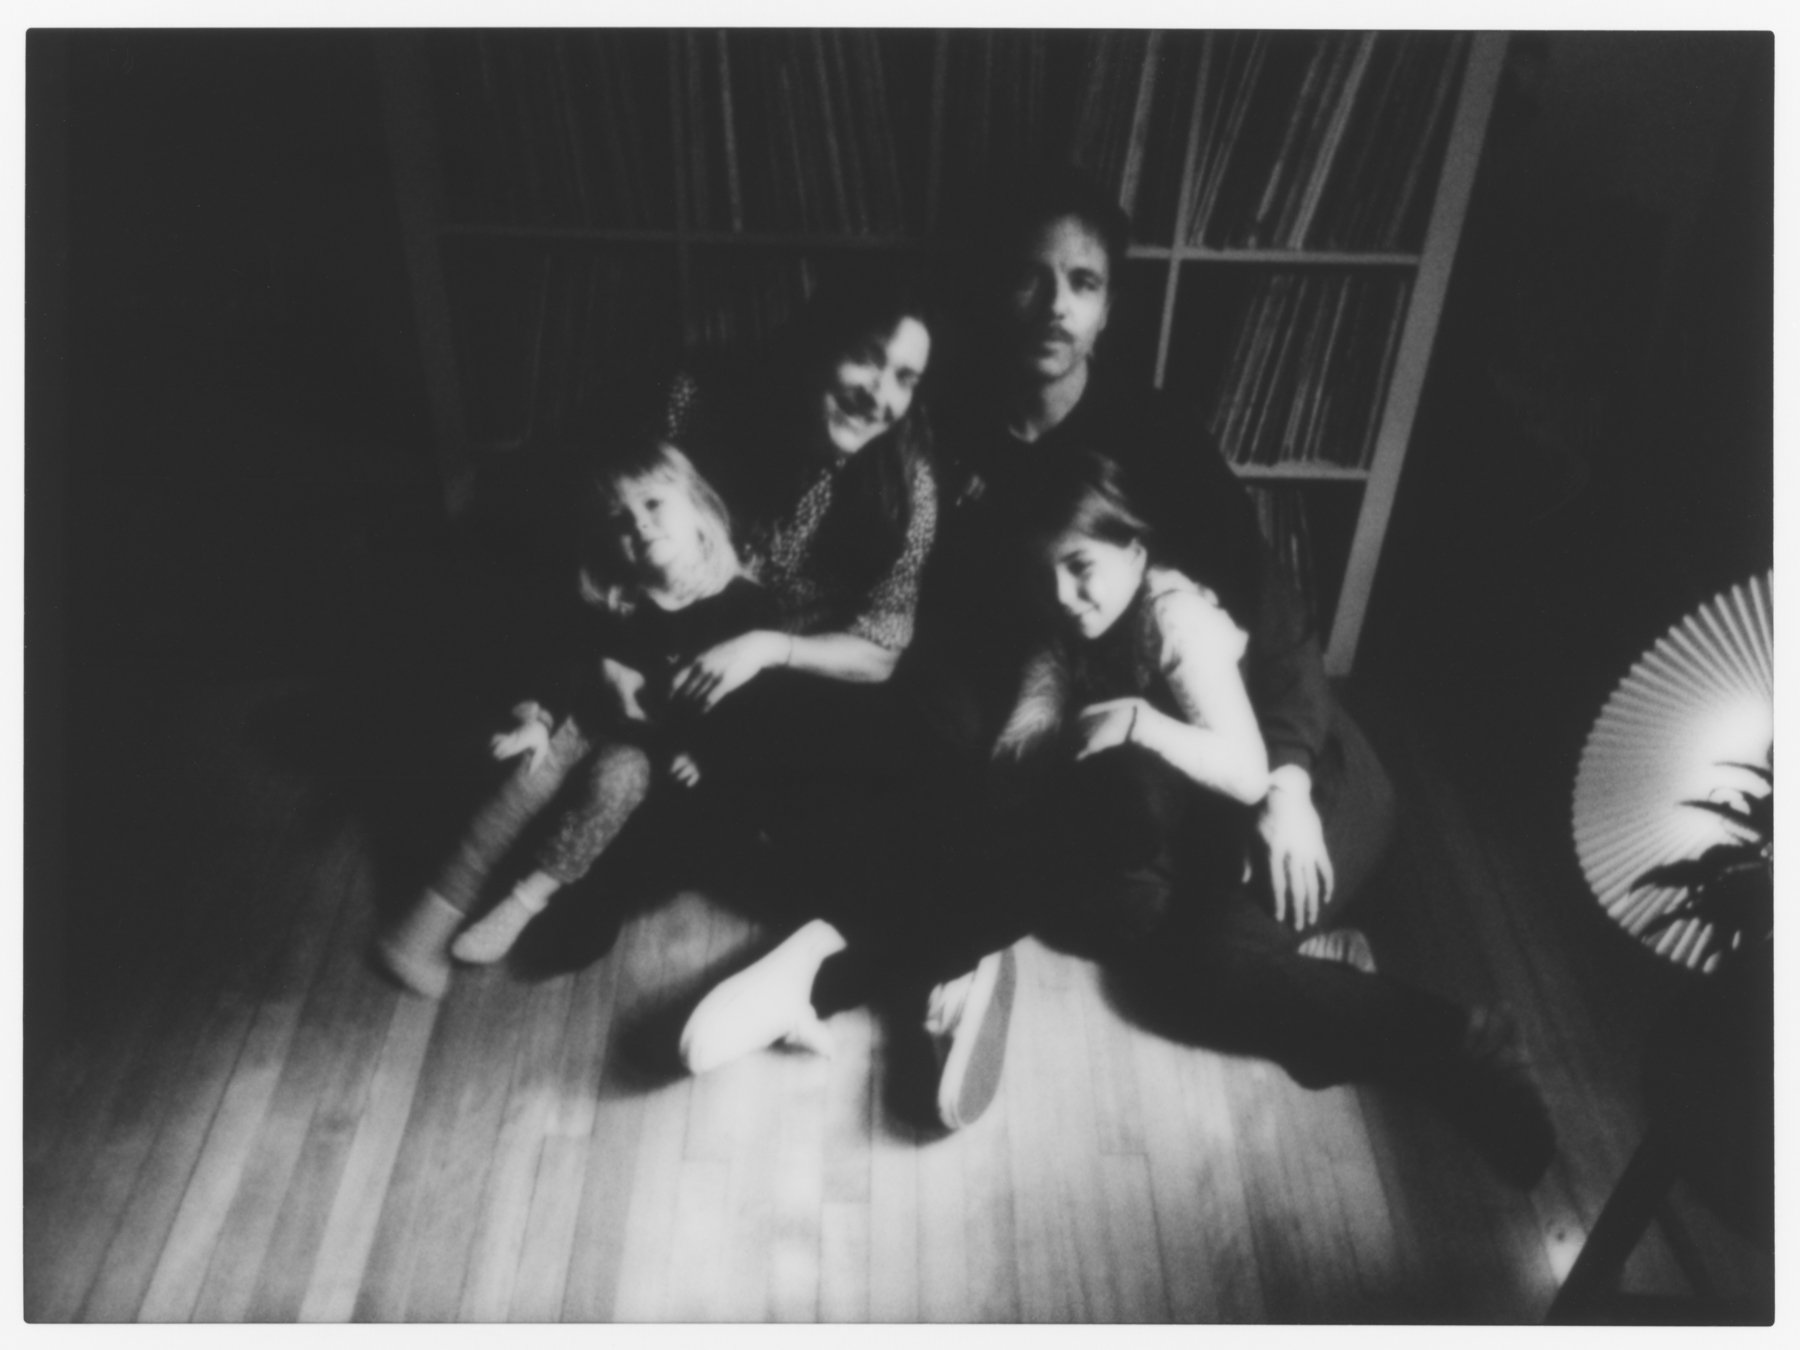 seance-photo-analogique-famille-photographe-film-et-super-8-a-montreal-marianne-charland-53.jpg (copie)